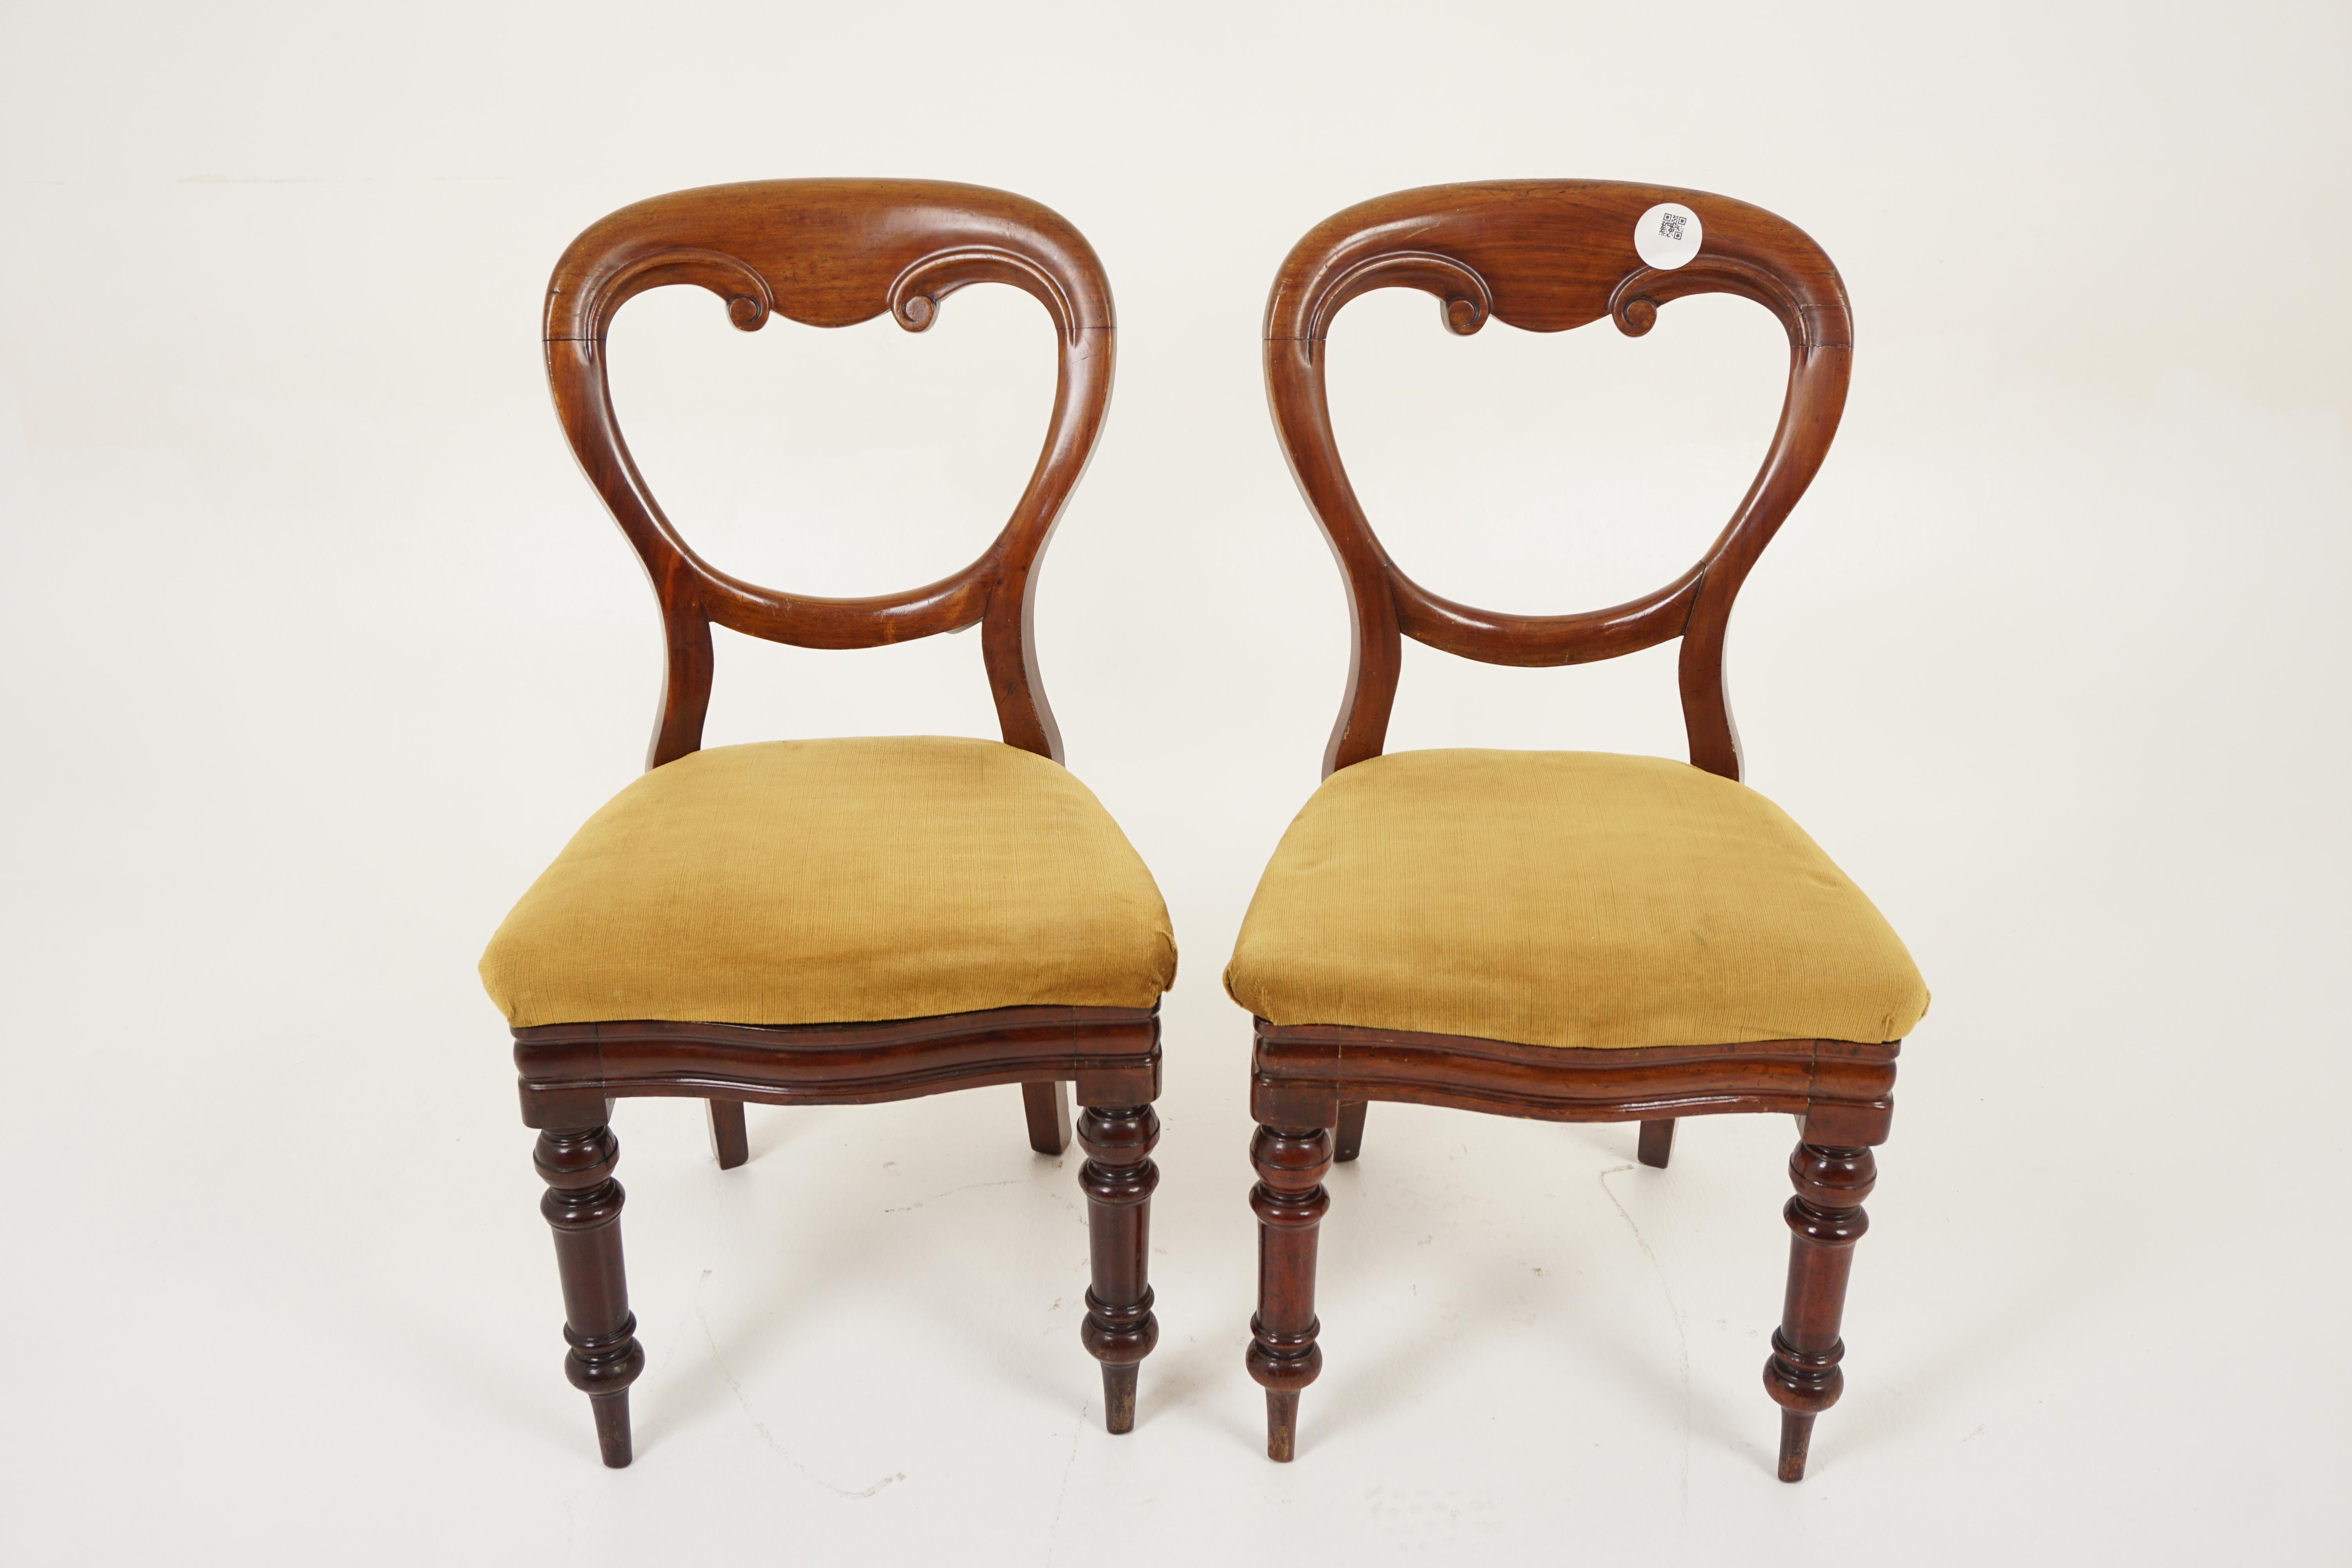 Antique Walnut Chairs, Pair of Victorian Balloon Back Dining Chairs, Occasional Chairs, Antique Furniture, Scotland 1880, H1132

+ Scotland 1880
+ Solid Walnut
+ Original Finish
+ With shaped carved detail to the back
+ Typical drop on seat